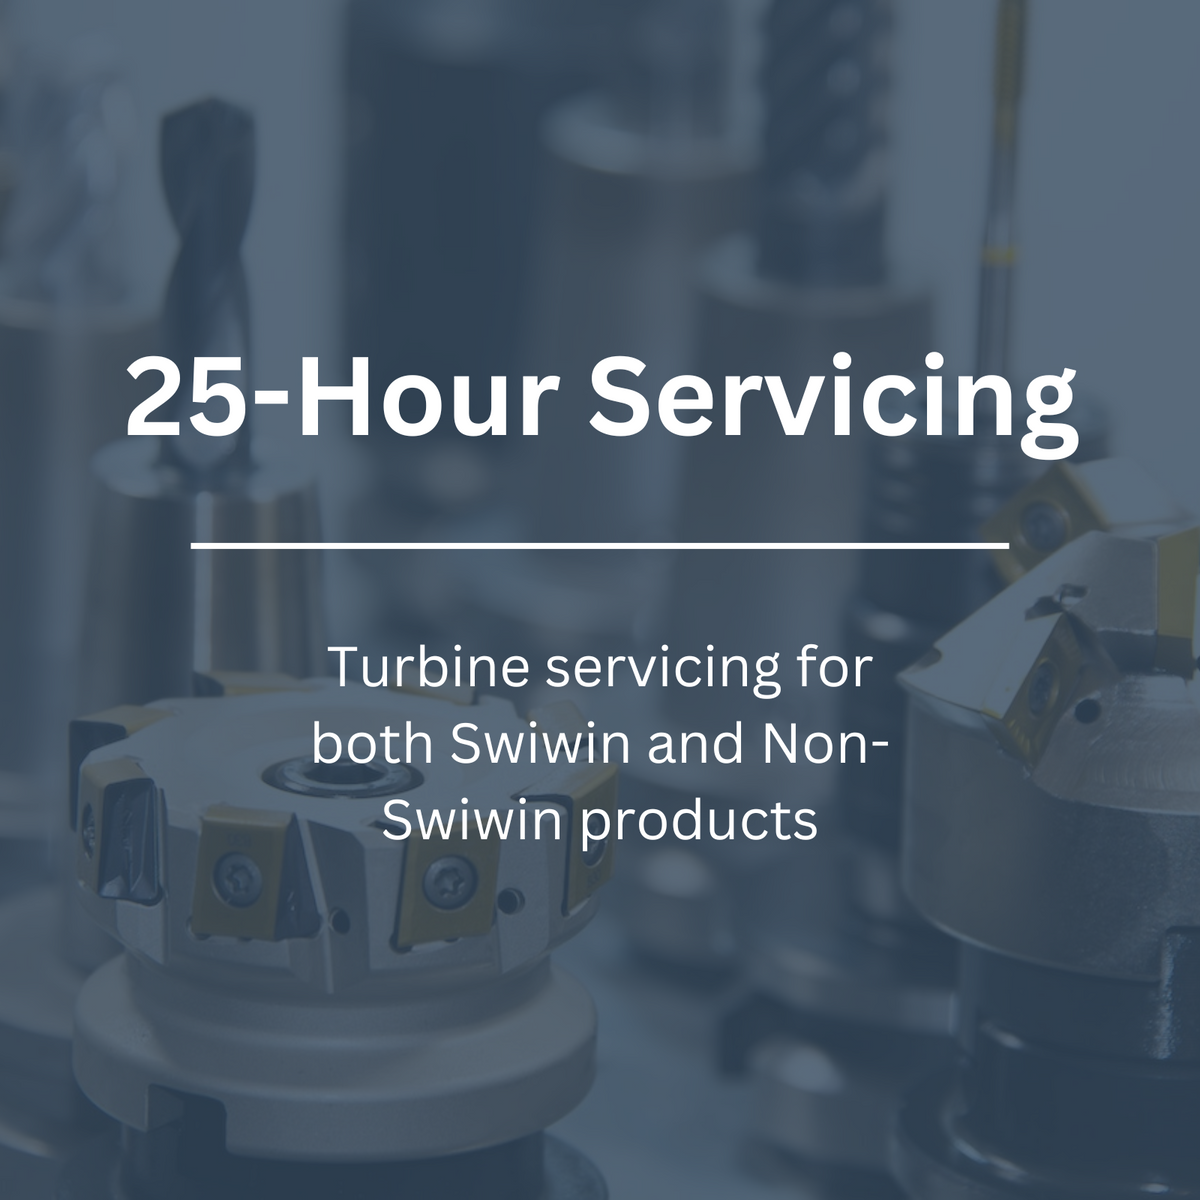 Swiwin USA's offering of servicing for all turbine engines